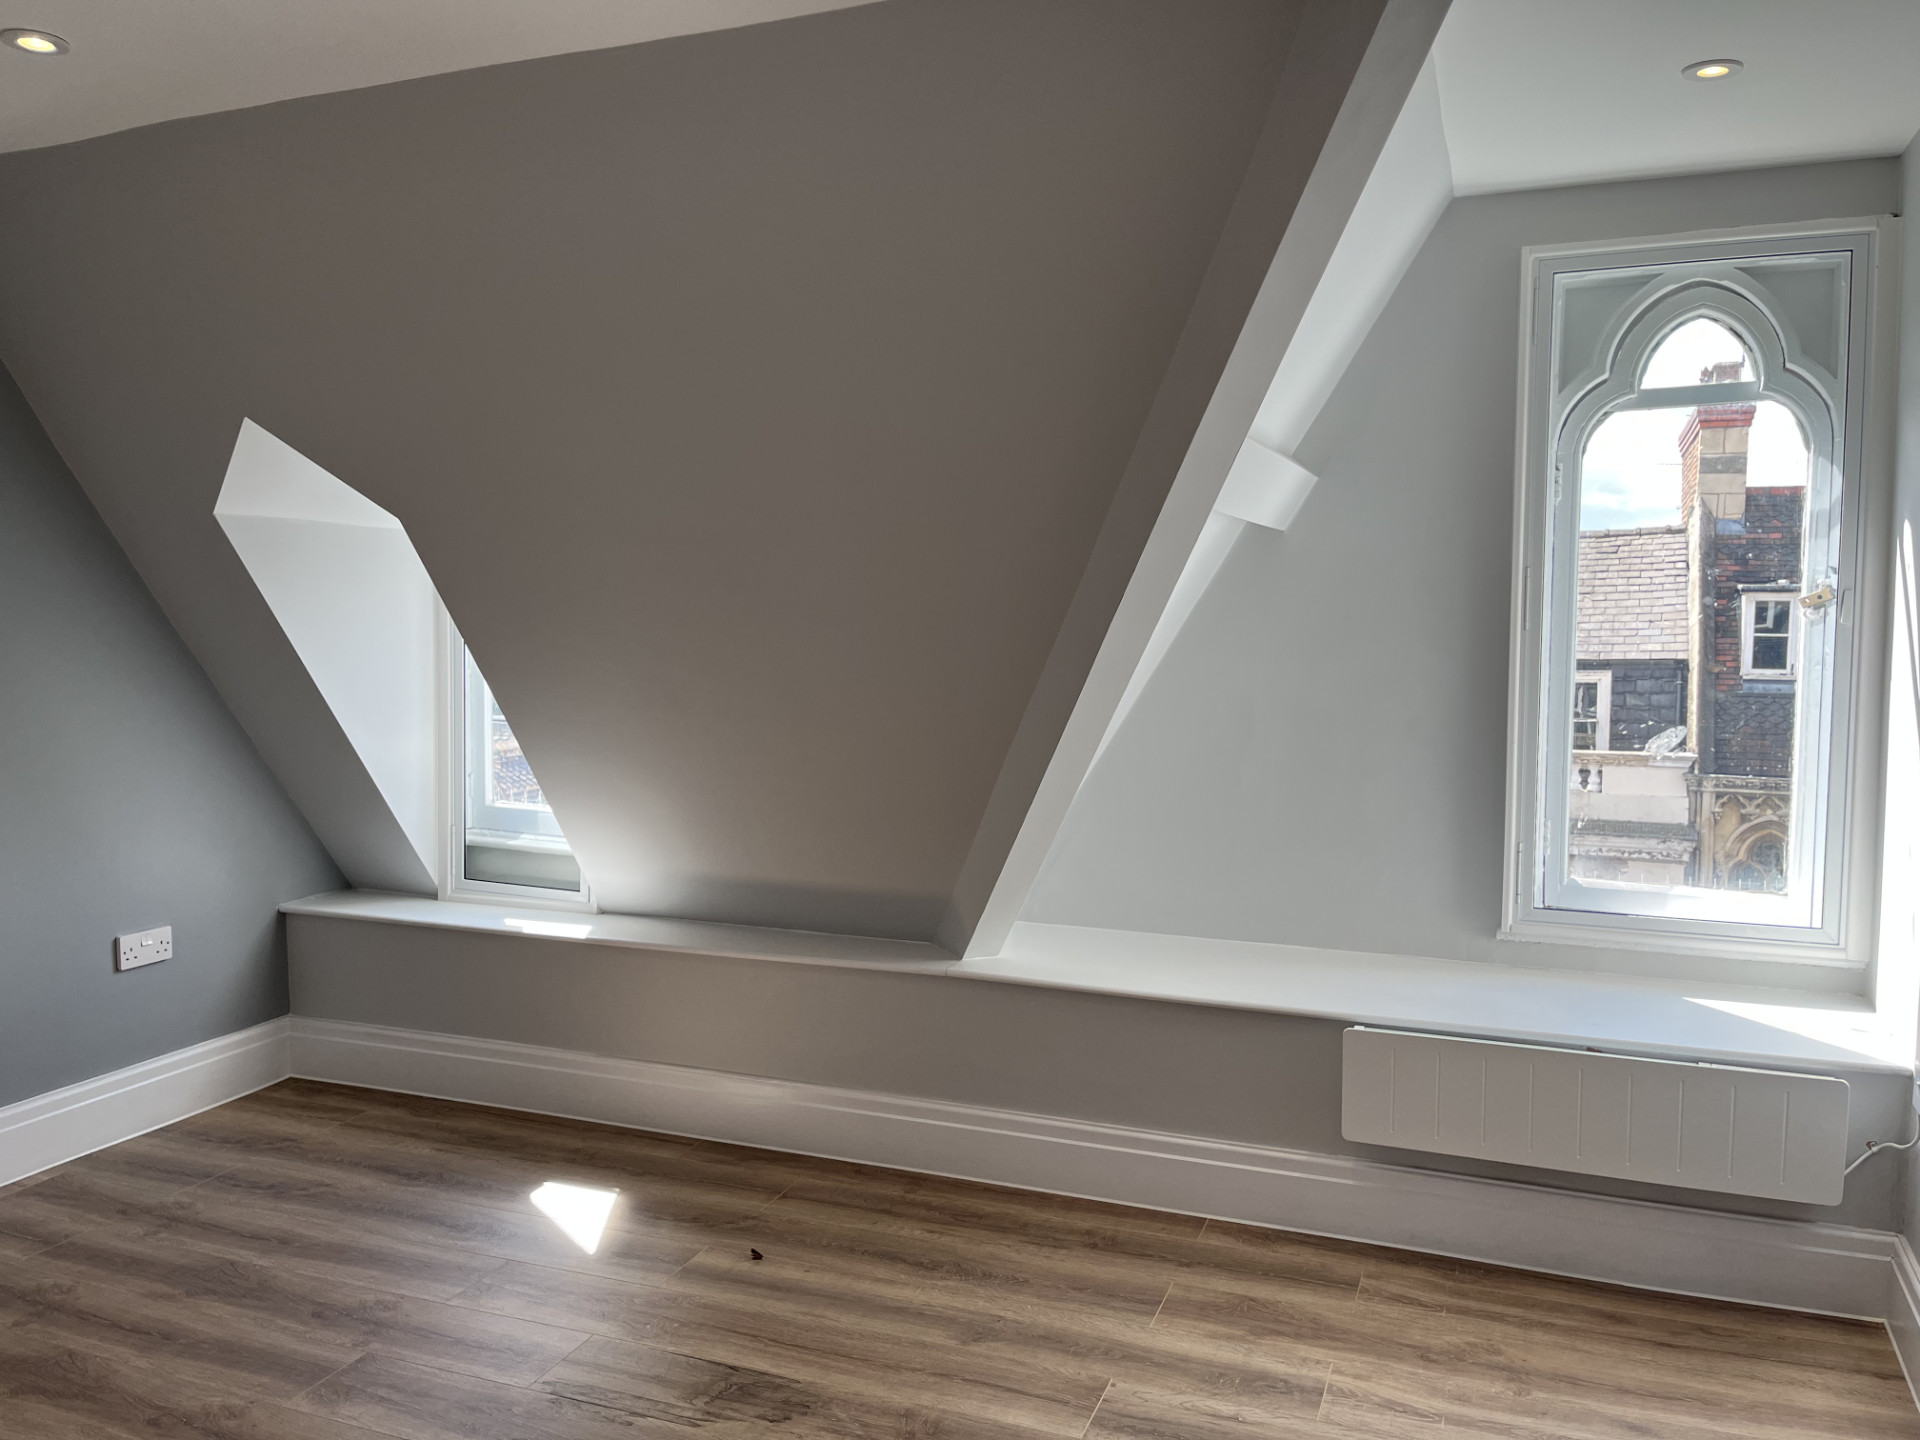 Alcove detailing of Penthouse at Eastgate, Chester, Cheshire, 2023